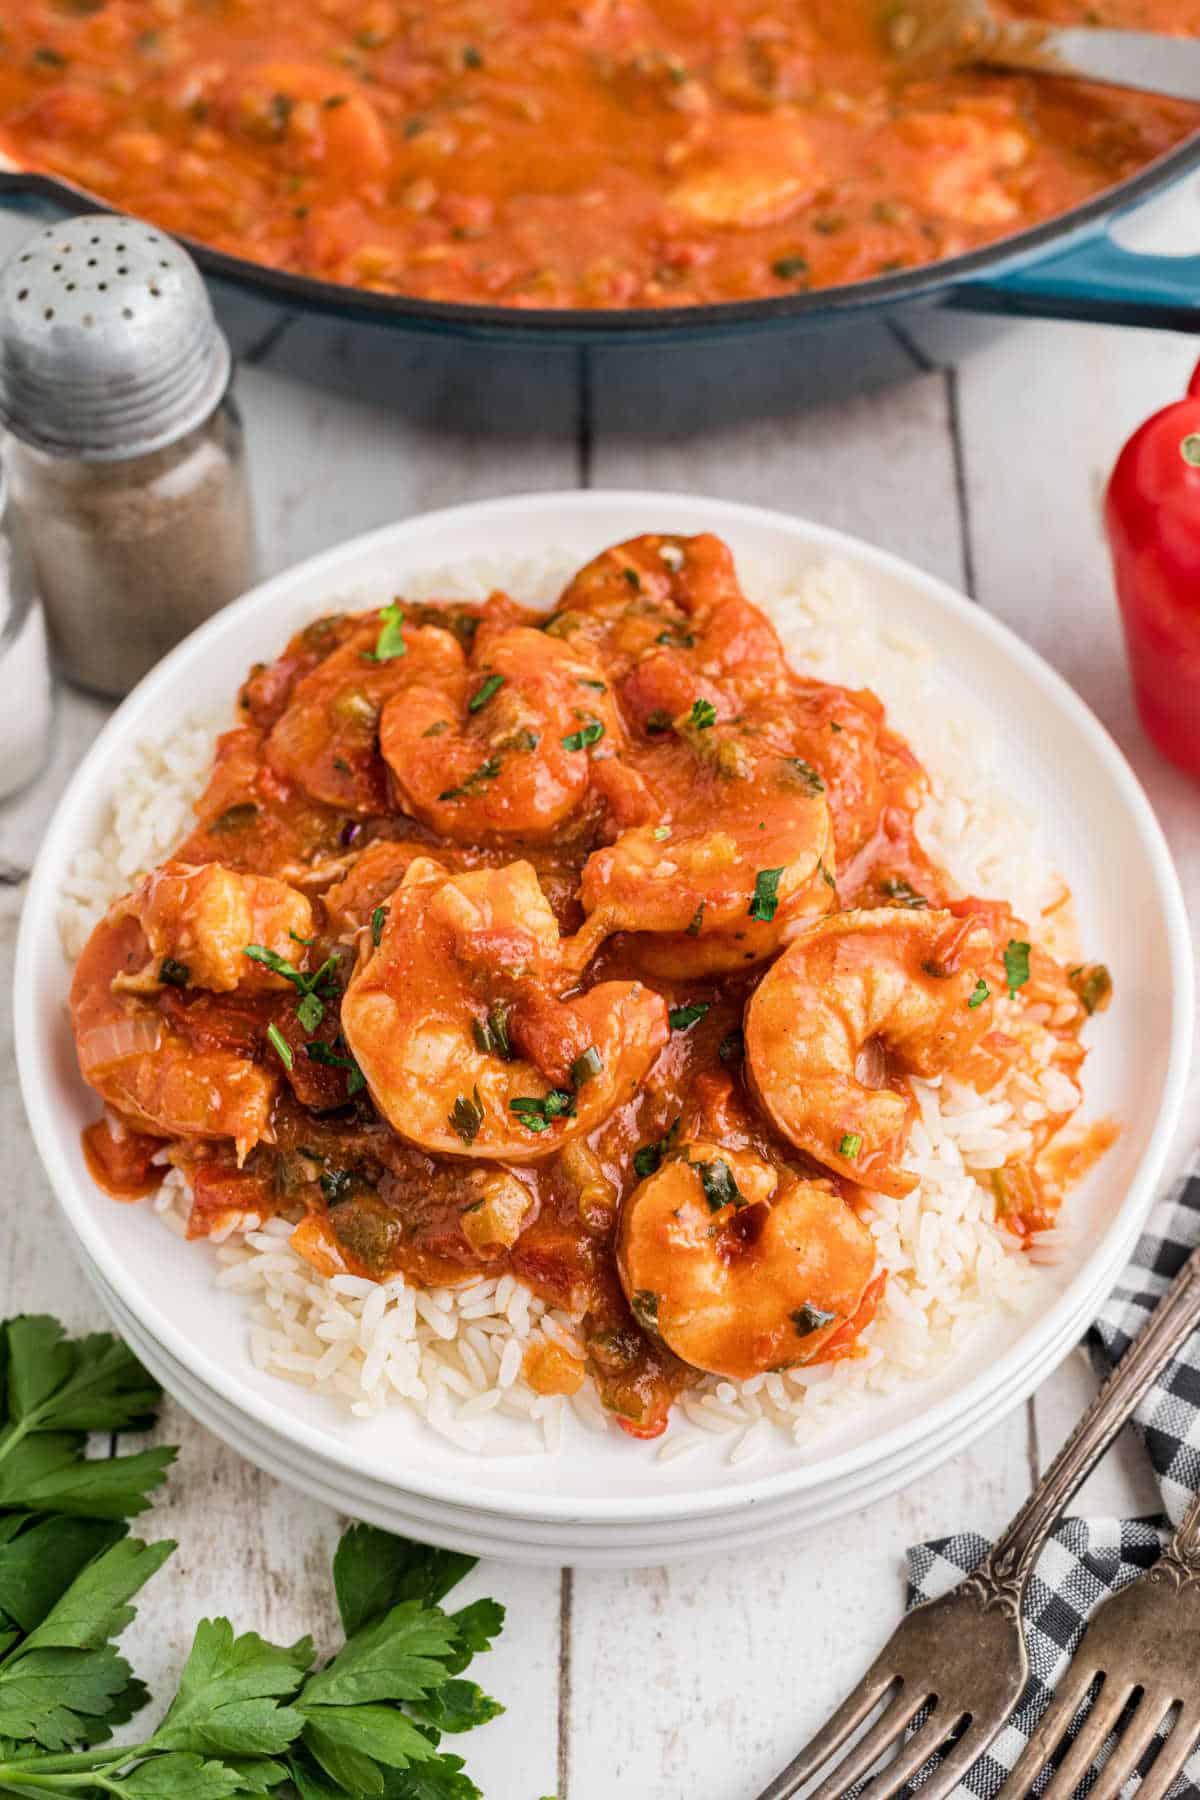 A dished up plate of new orleans style shrimp creole on a bed of rice.